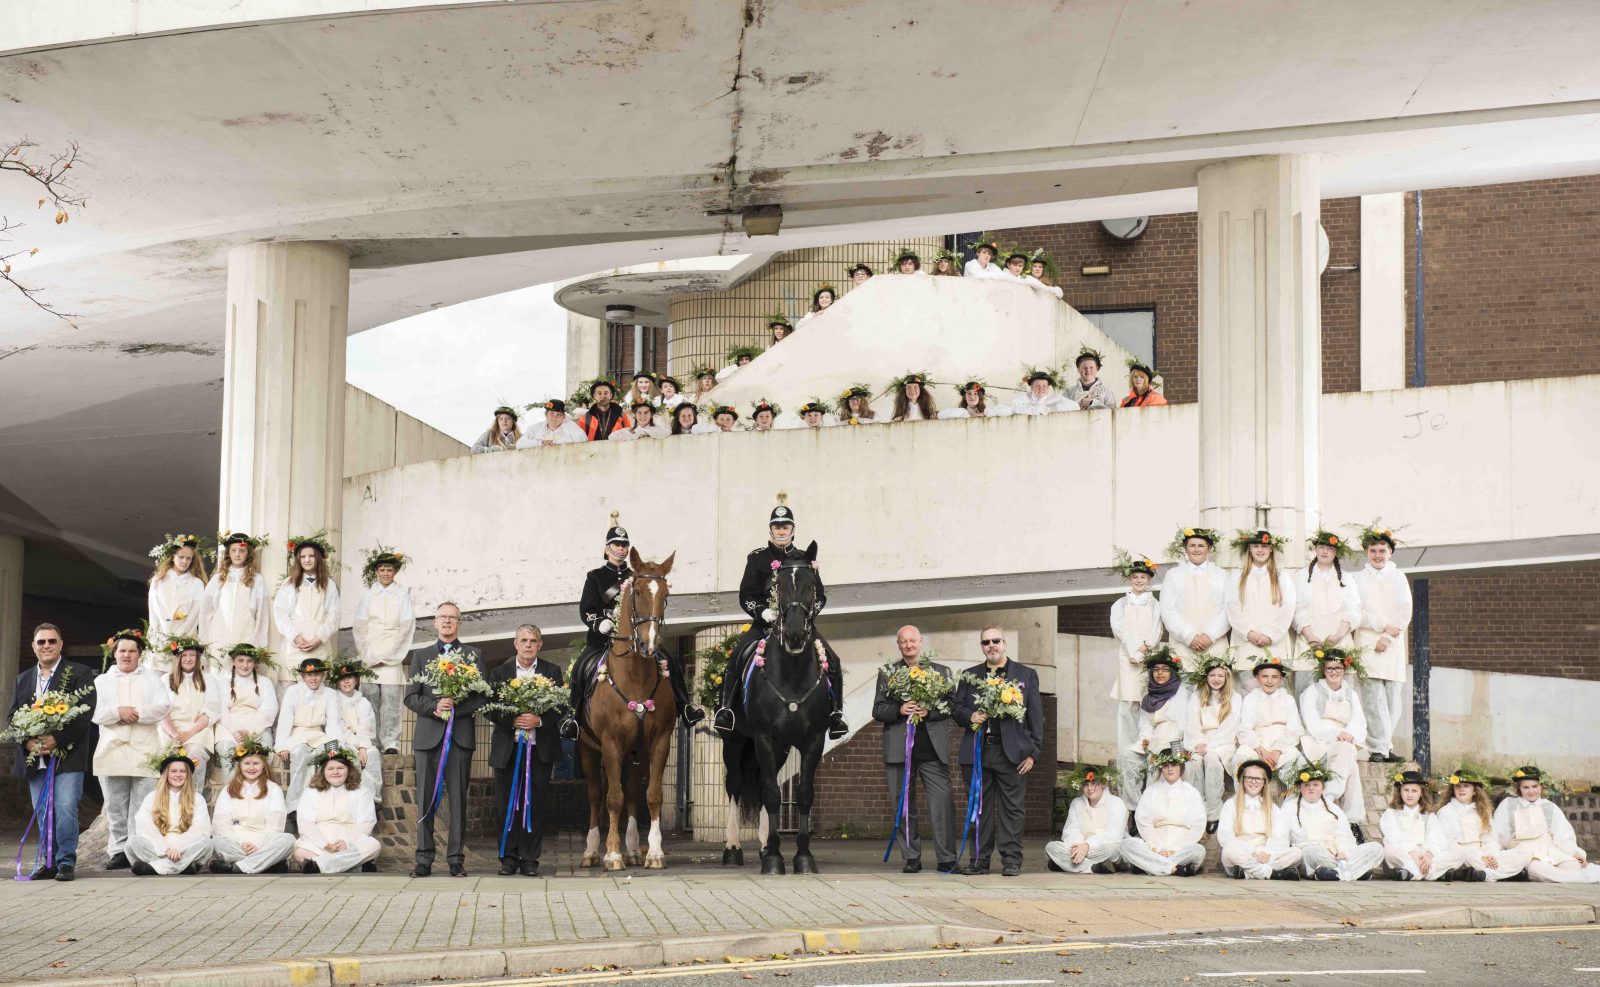 A very large group of people, around 60, are posed for a photograph on different levels of a walkway. Many of the people are young people, wearing white overalls, aprons and hates covered with flowers and greenery. 5 men wear suit jackets and trousers and hold large bunches of flowers. In the centre, on the ground level, are two police officers on horses wearing roses and flowers on their harnesses.